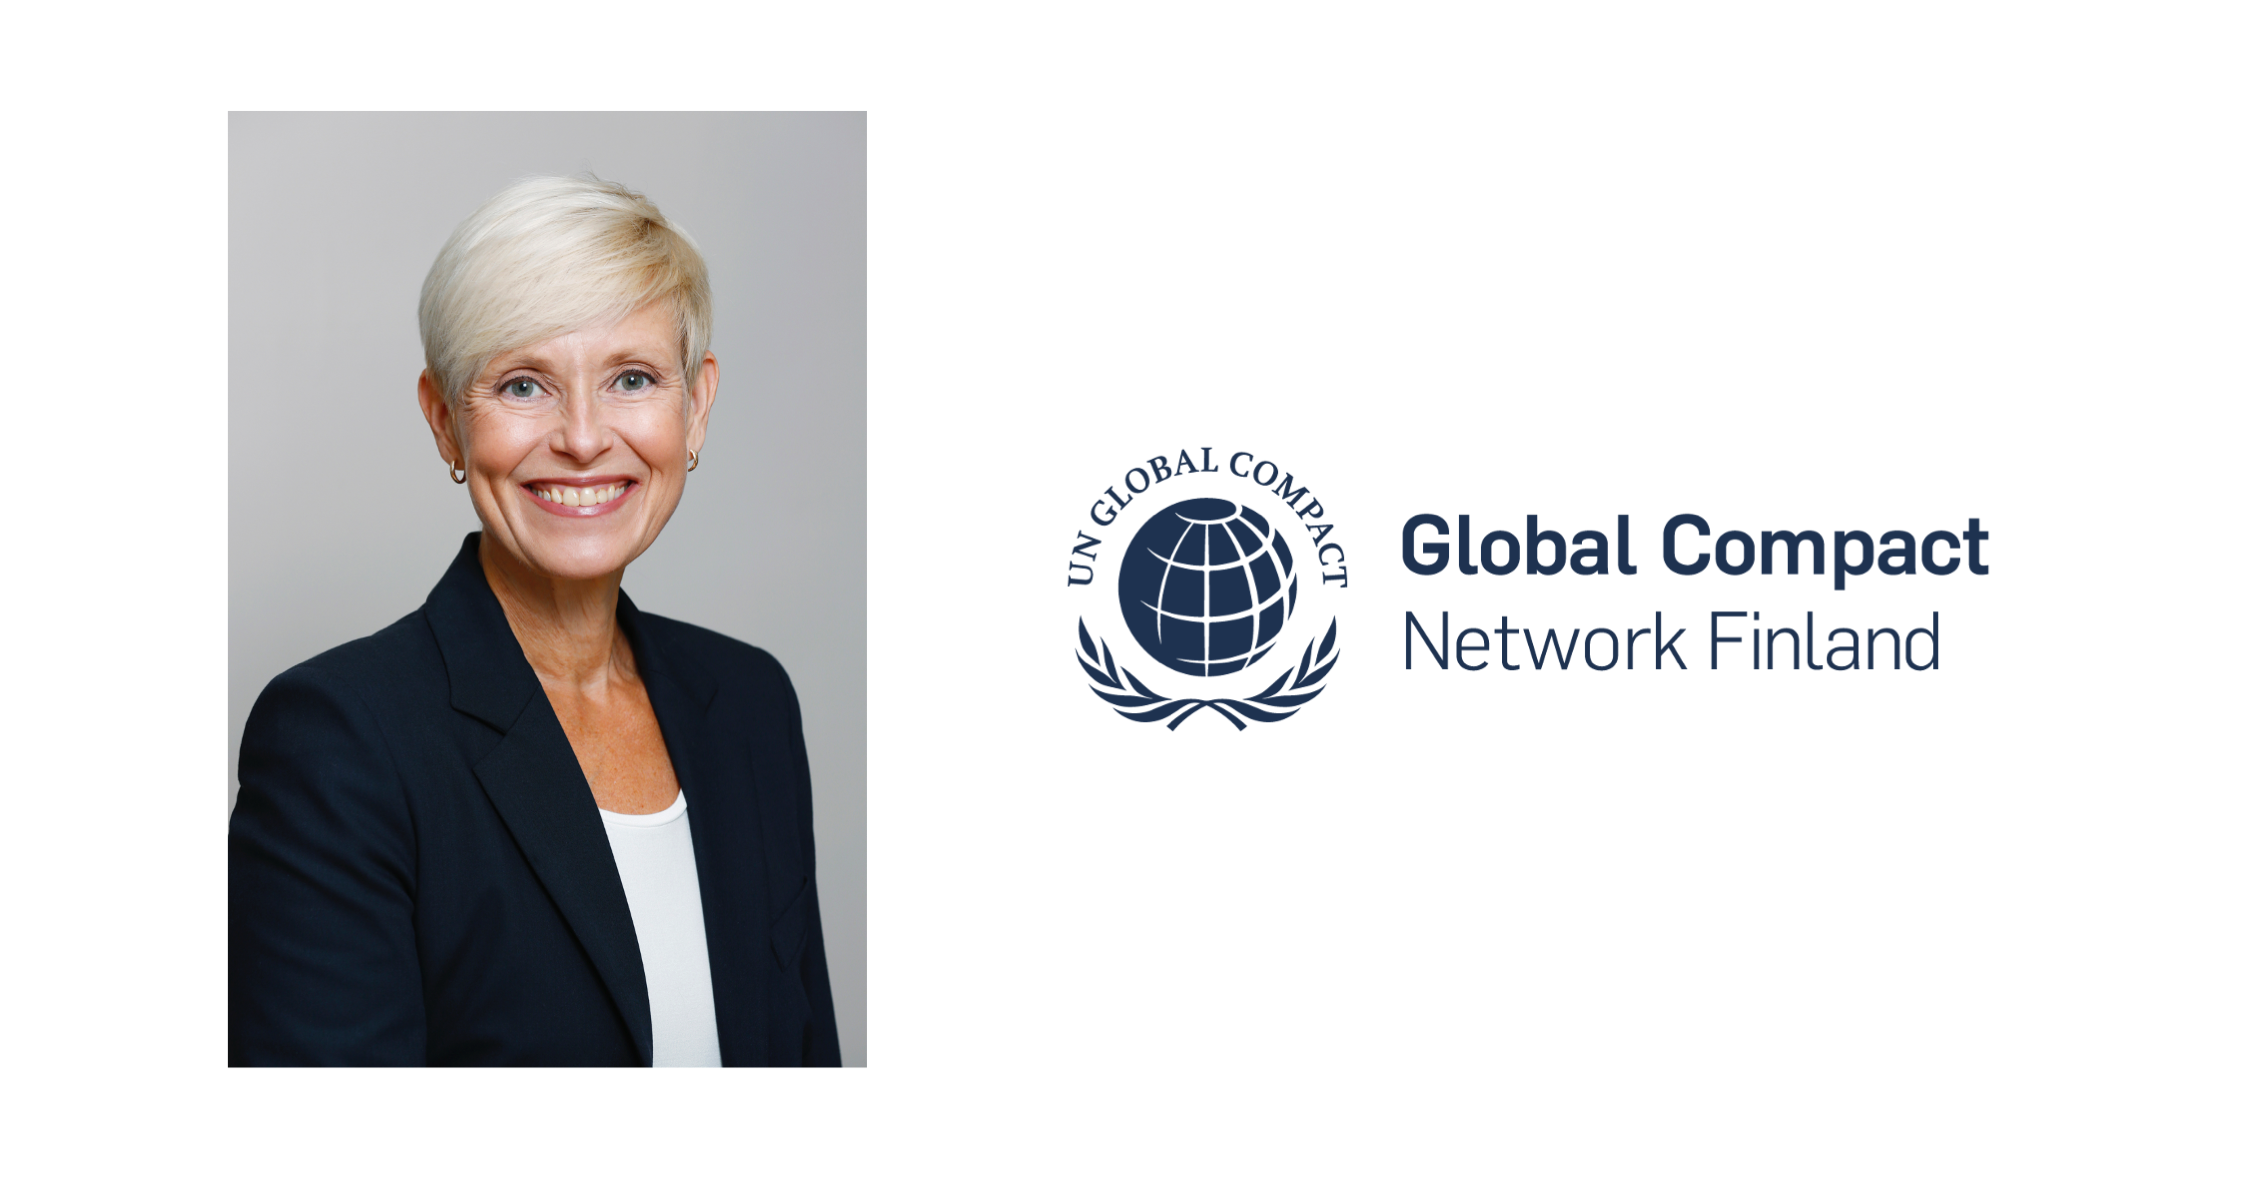 Anna-Kaisa Auvinen has been appointed as the new Executive Director of Global Compact Network Finland.